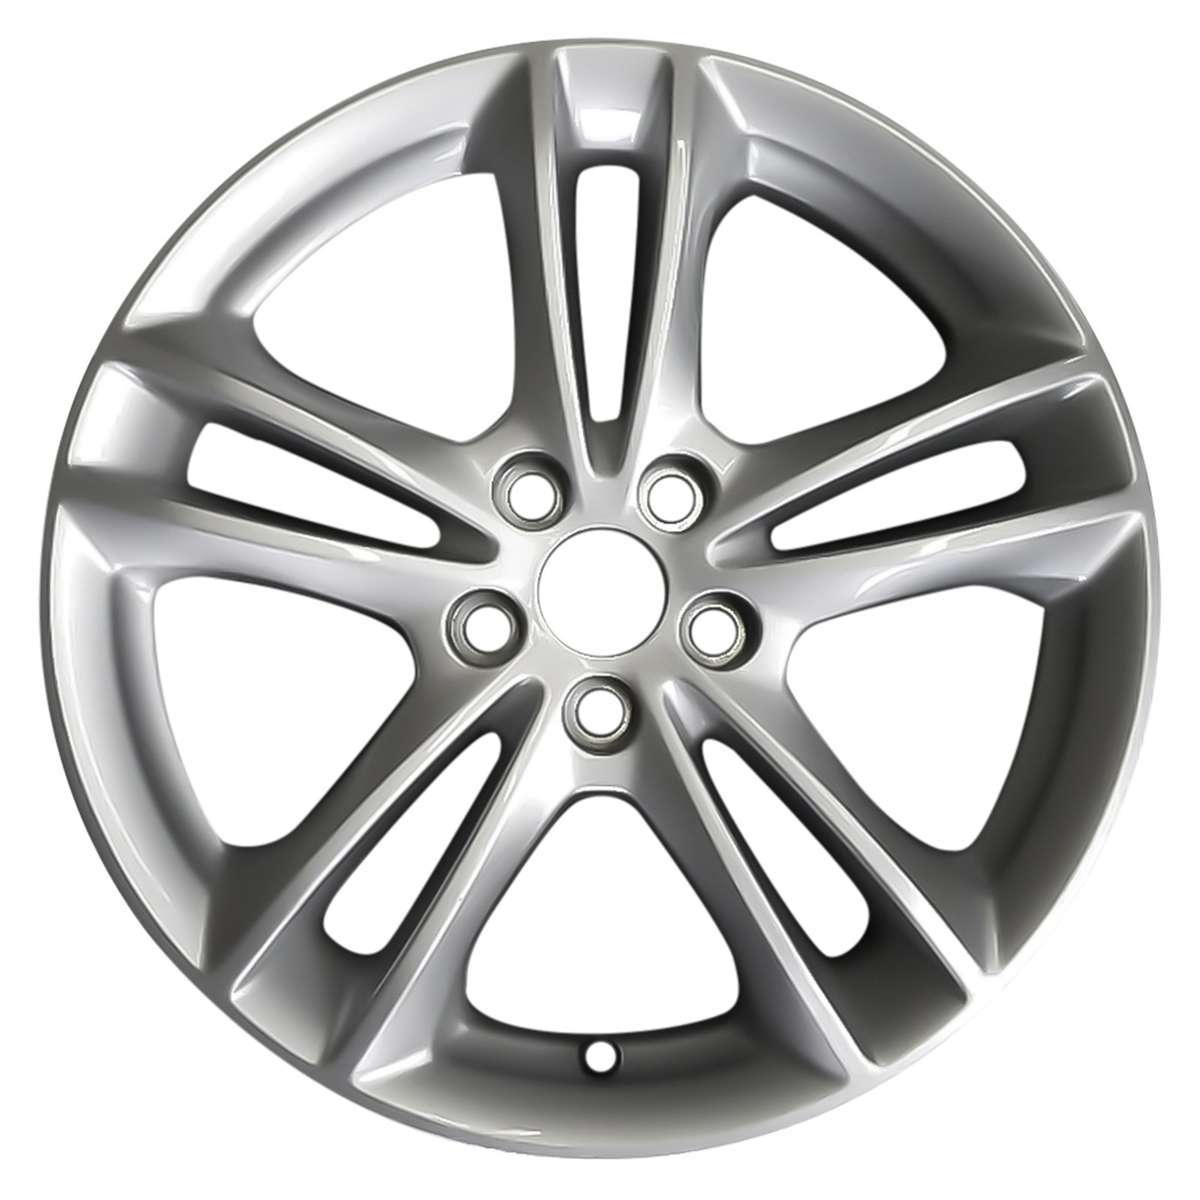 2018 Ford Fusion New 17" Replacement Wheel Rim RW3984S